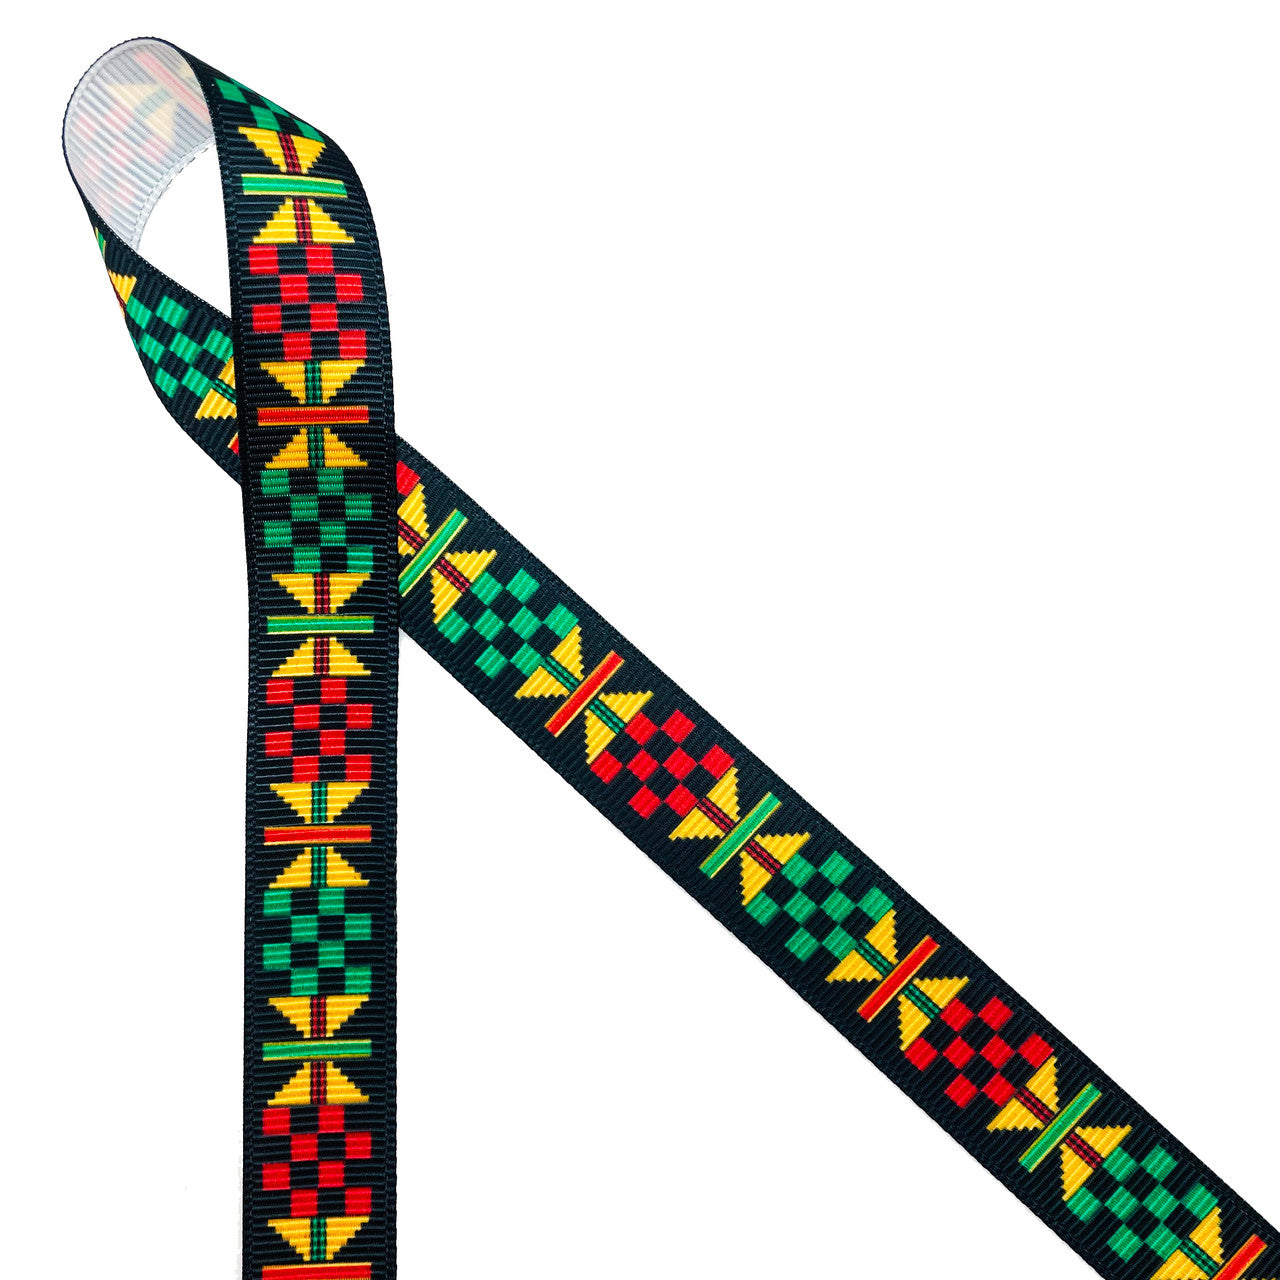 Ankara Kente African design in traditional colors of yellow, green, red and black printed on 5/8" white grosgrain ribbon is an ideal ribbon for hair bows, headbands, sewing projects, crafts and festivals. All our ribbons are designed and printed in the USA